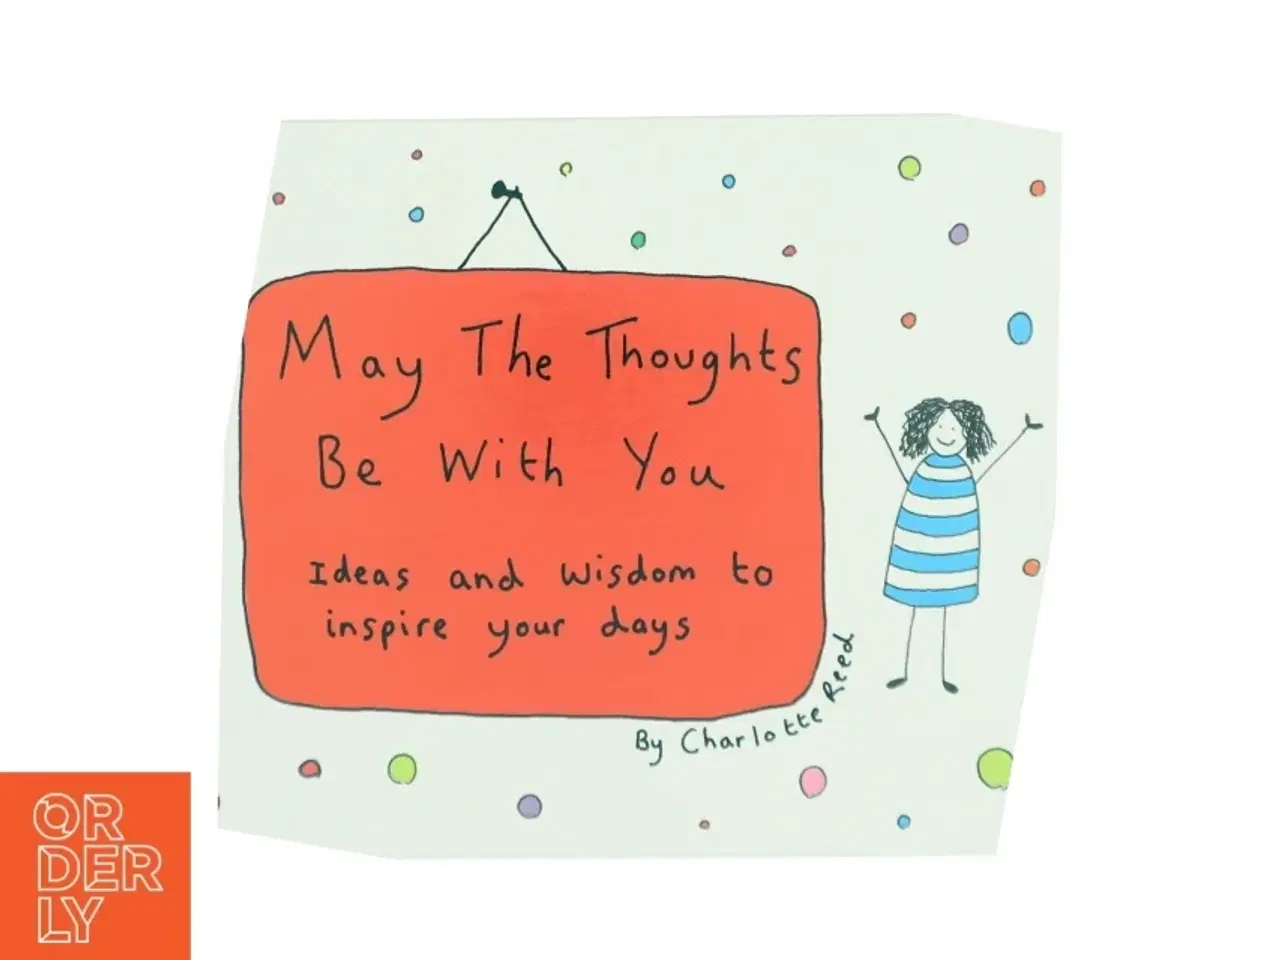 Billede 1 - May the Thoughts Be with You af Charlotte Reed (Writer of meditations) (Bog)